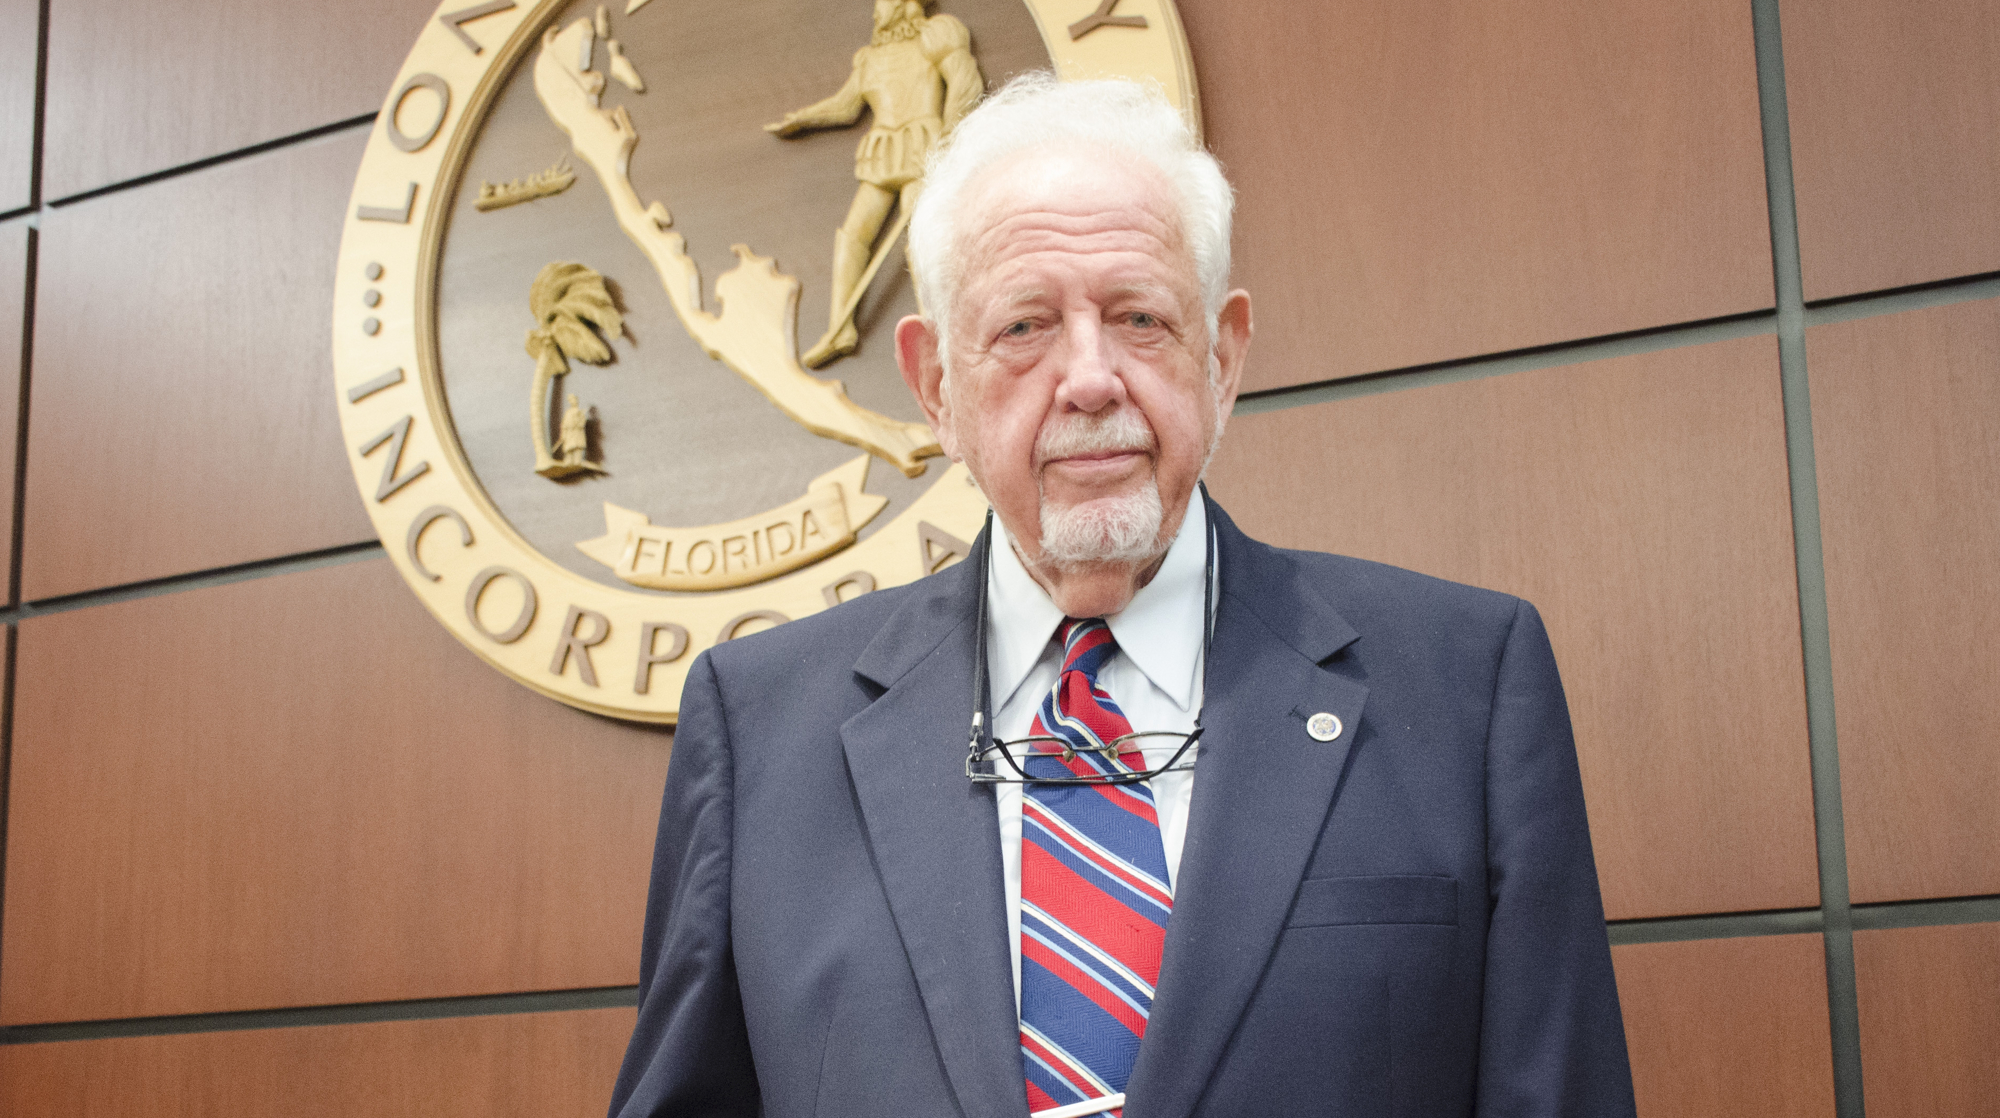 When District 2 Commissioner George Spoll's term expires in March, he said he plans to continue to work on the Town Center project as a private citizen on the Longboat Key Revitalization Task Force.